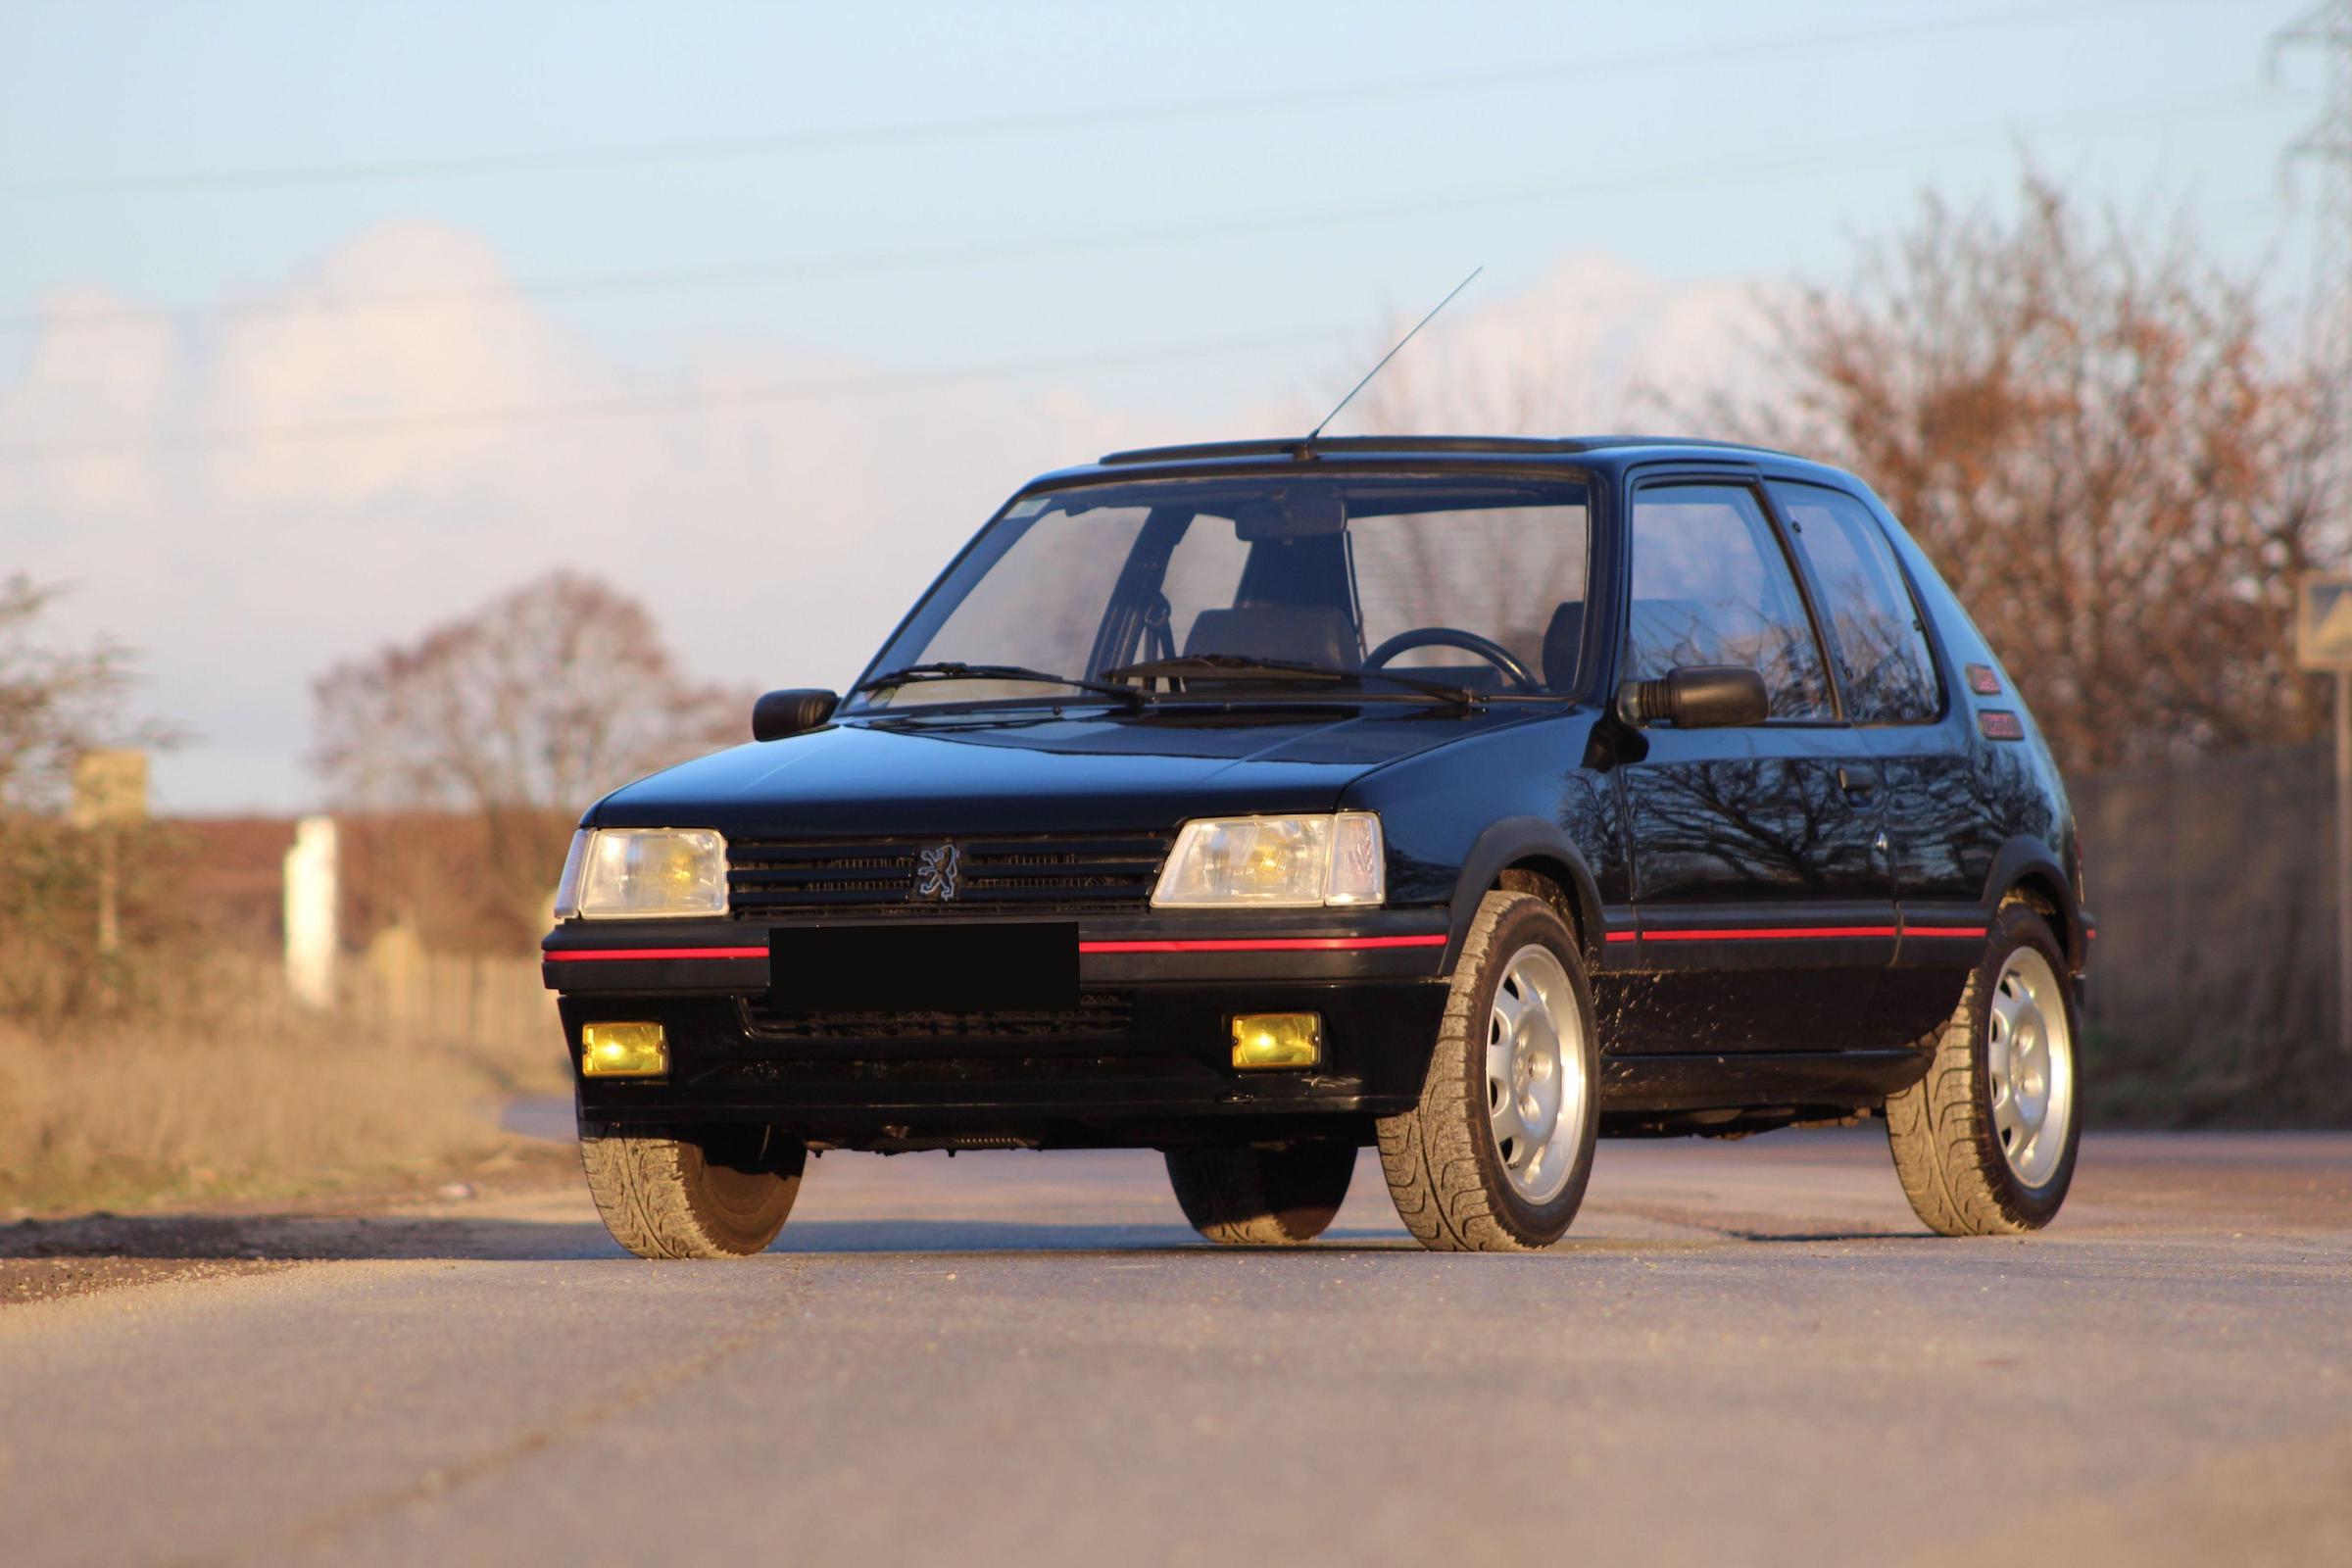 Quite a number: Peugeot 205 GTI 1.9 breaks the £40,000 barrier